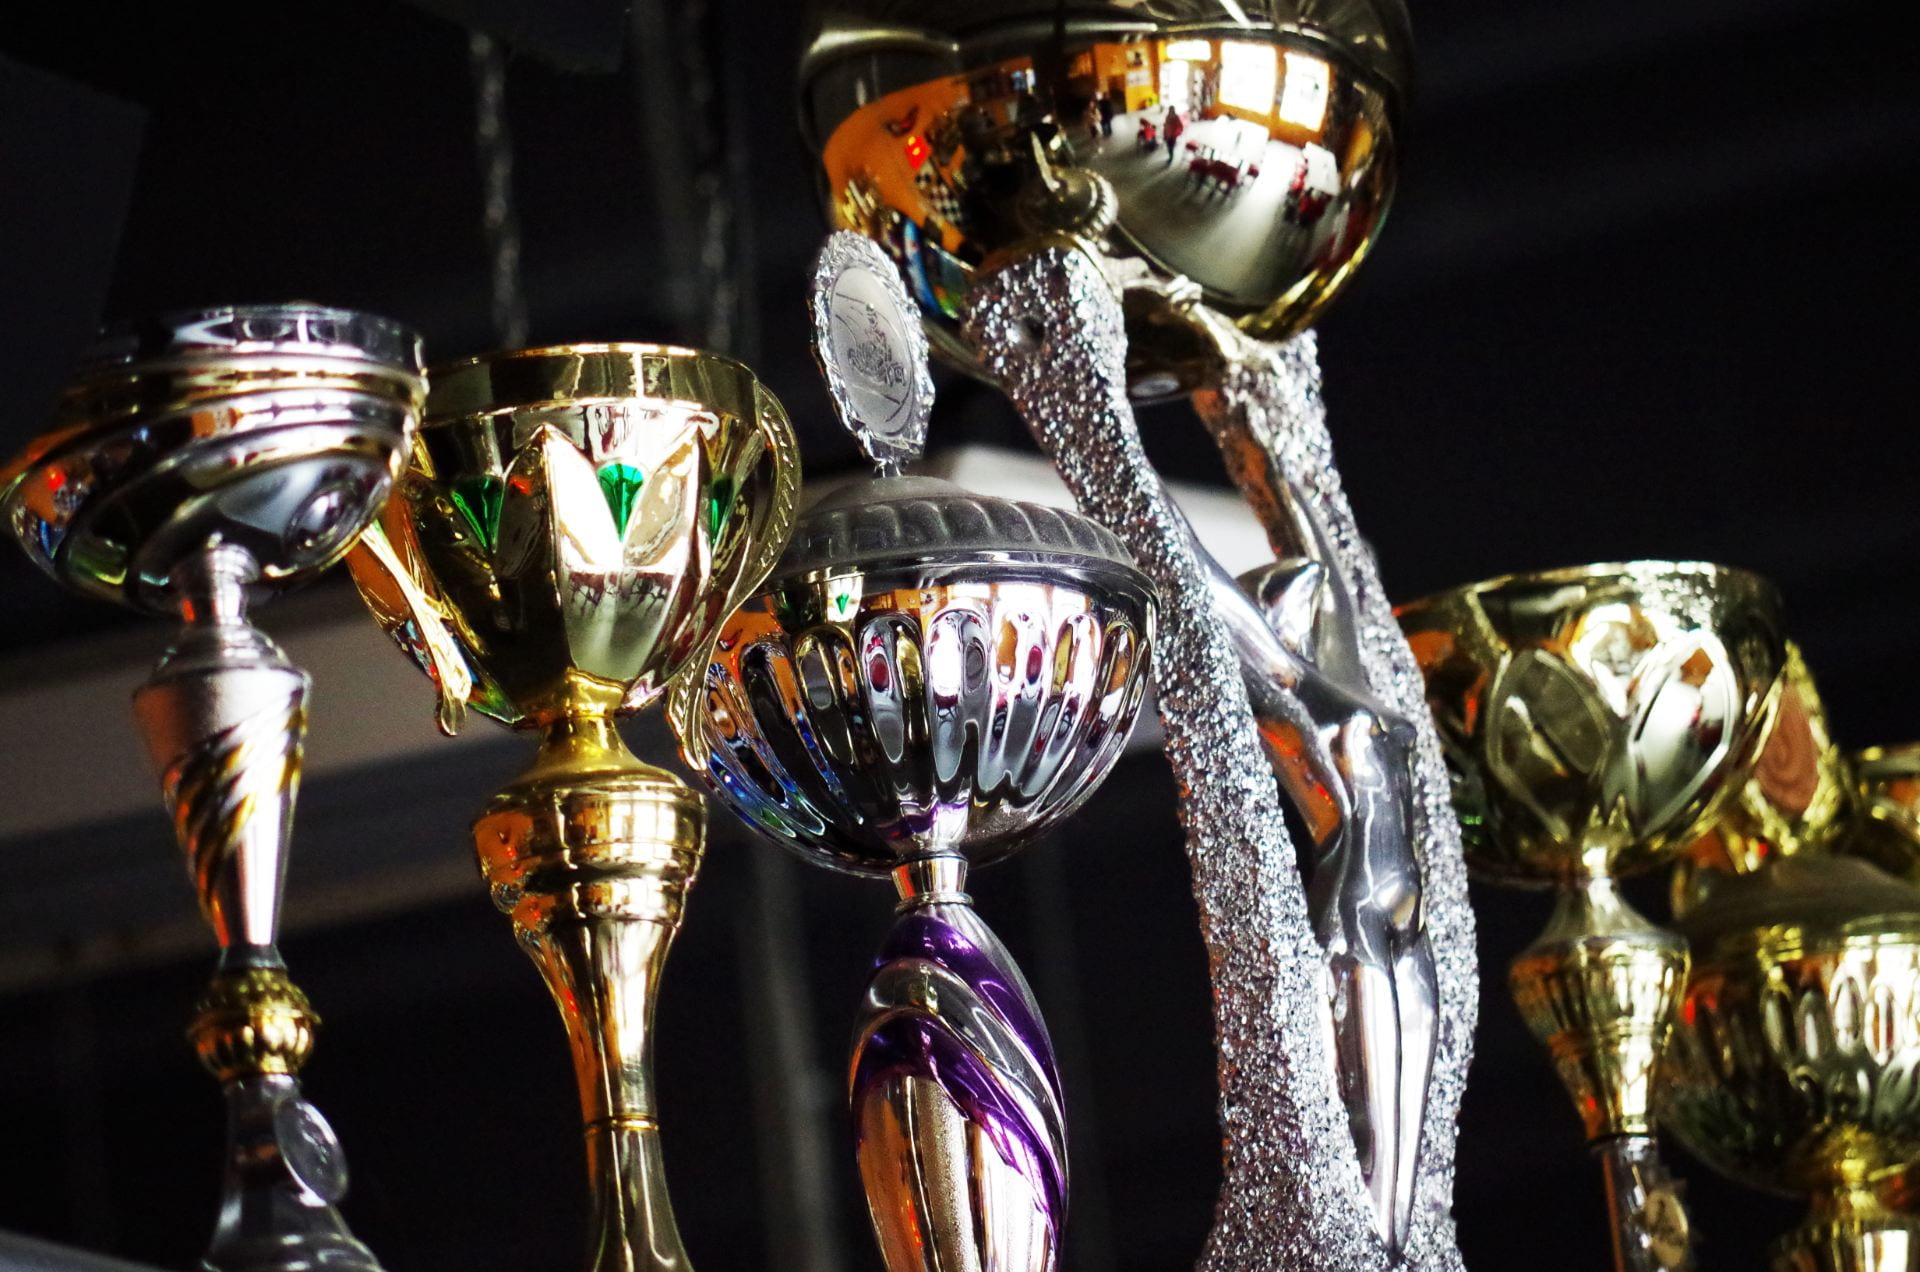 Photograph of metal trophies of various colors